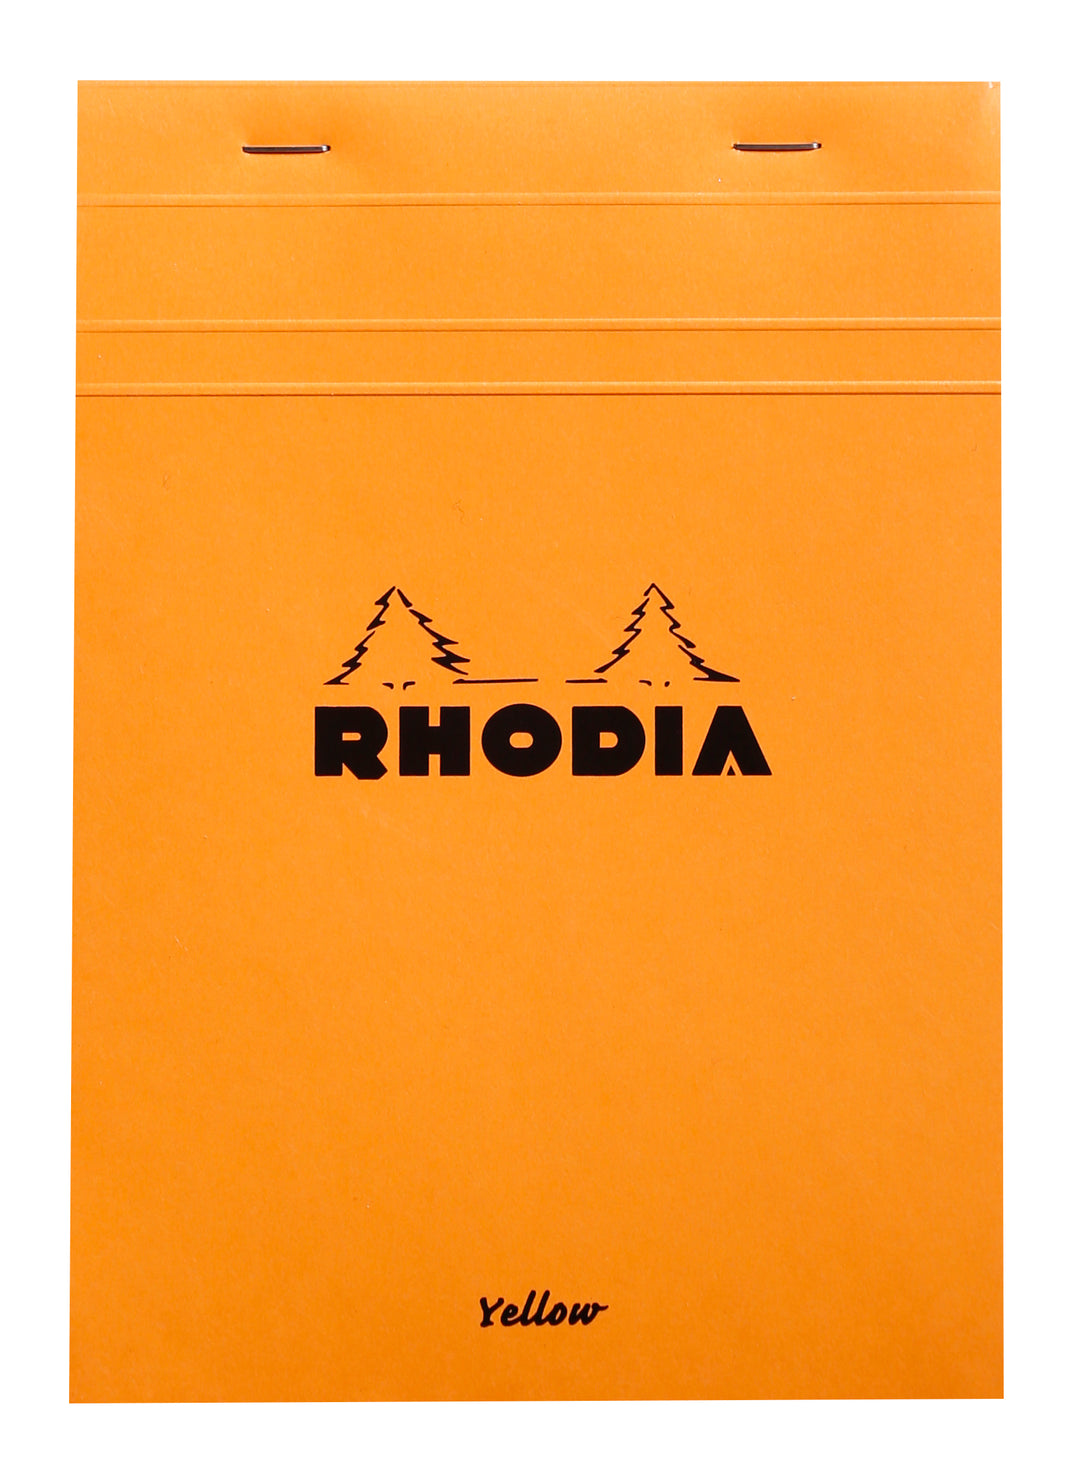 Rhodia Basics Stapled Square Grid Ruled Yellow Paper Notepad - A5